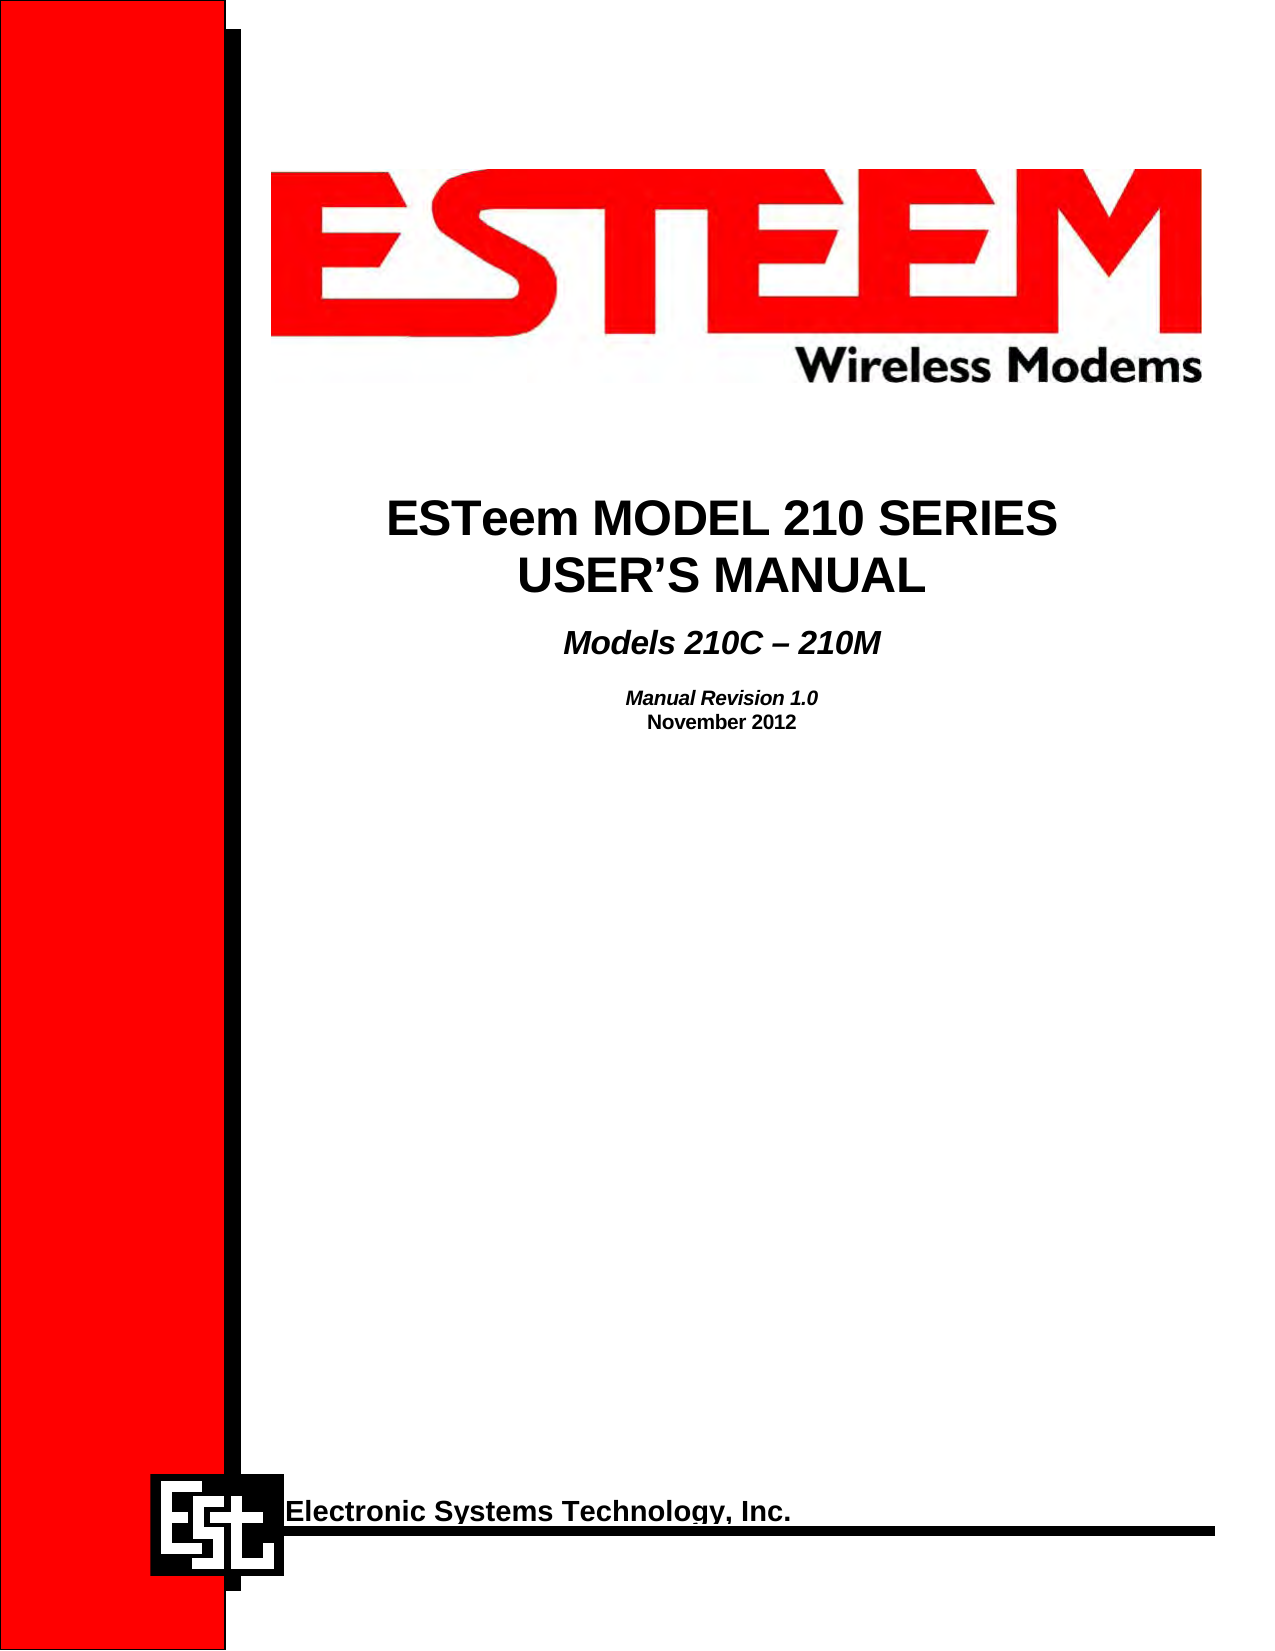                 ESTeem MODEL 210 SERIES USER’S MANUAL  Models 210C – 210M   Manual Revision 1.0 November 2012      Electronic Systems Technology, Inc.